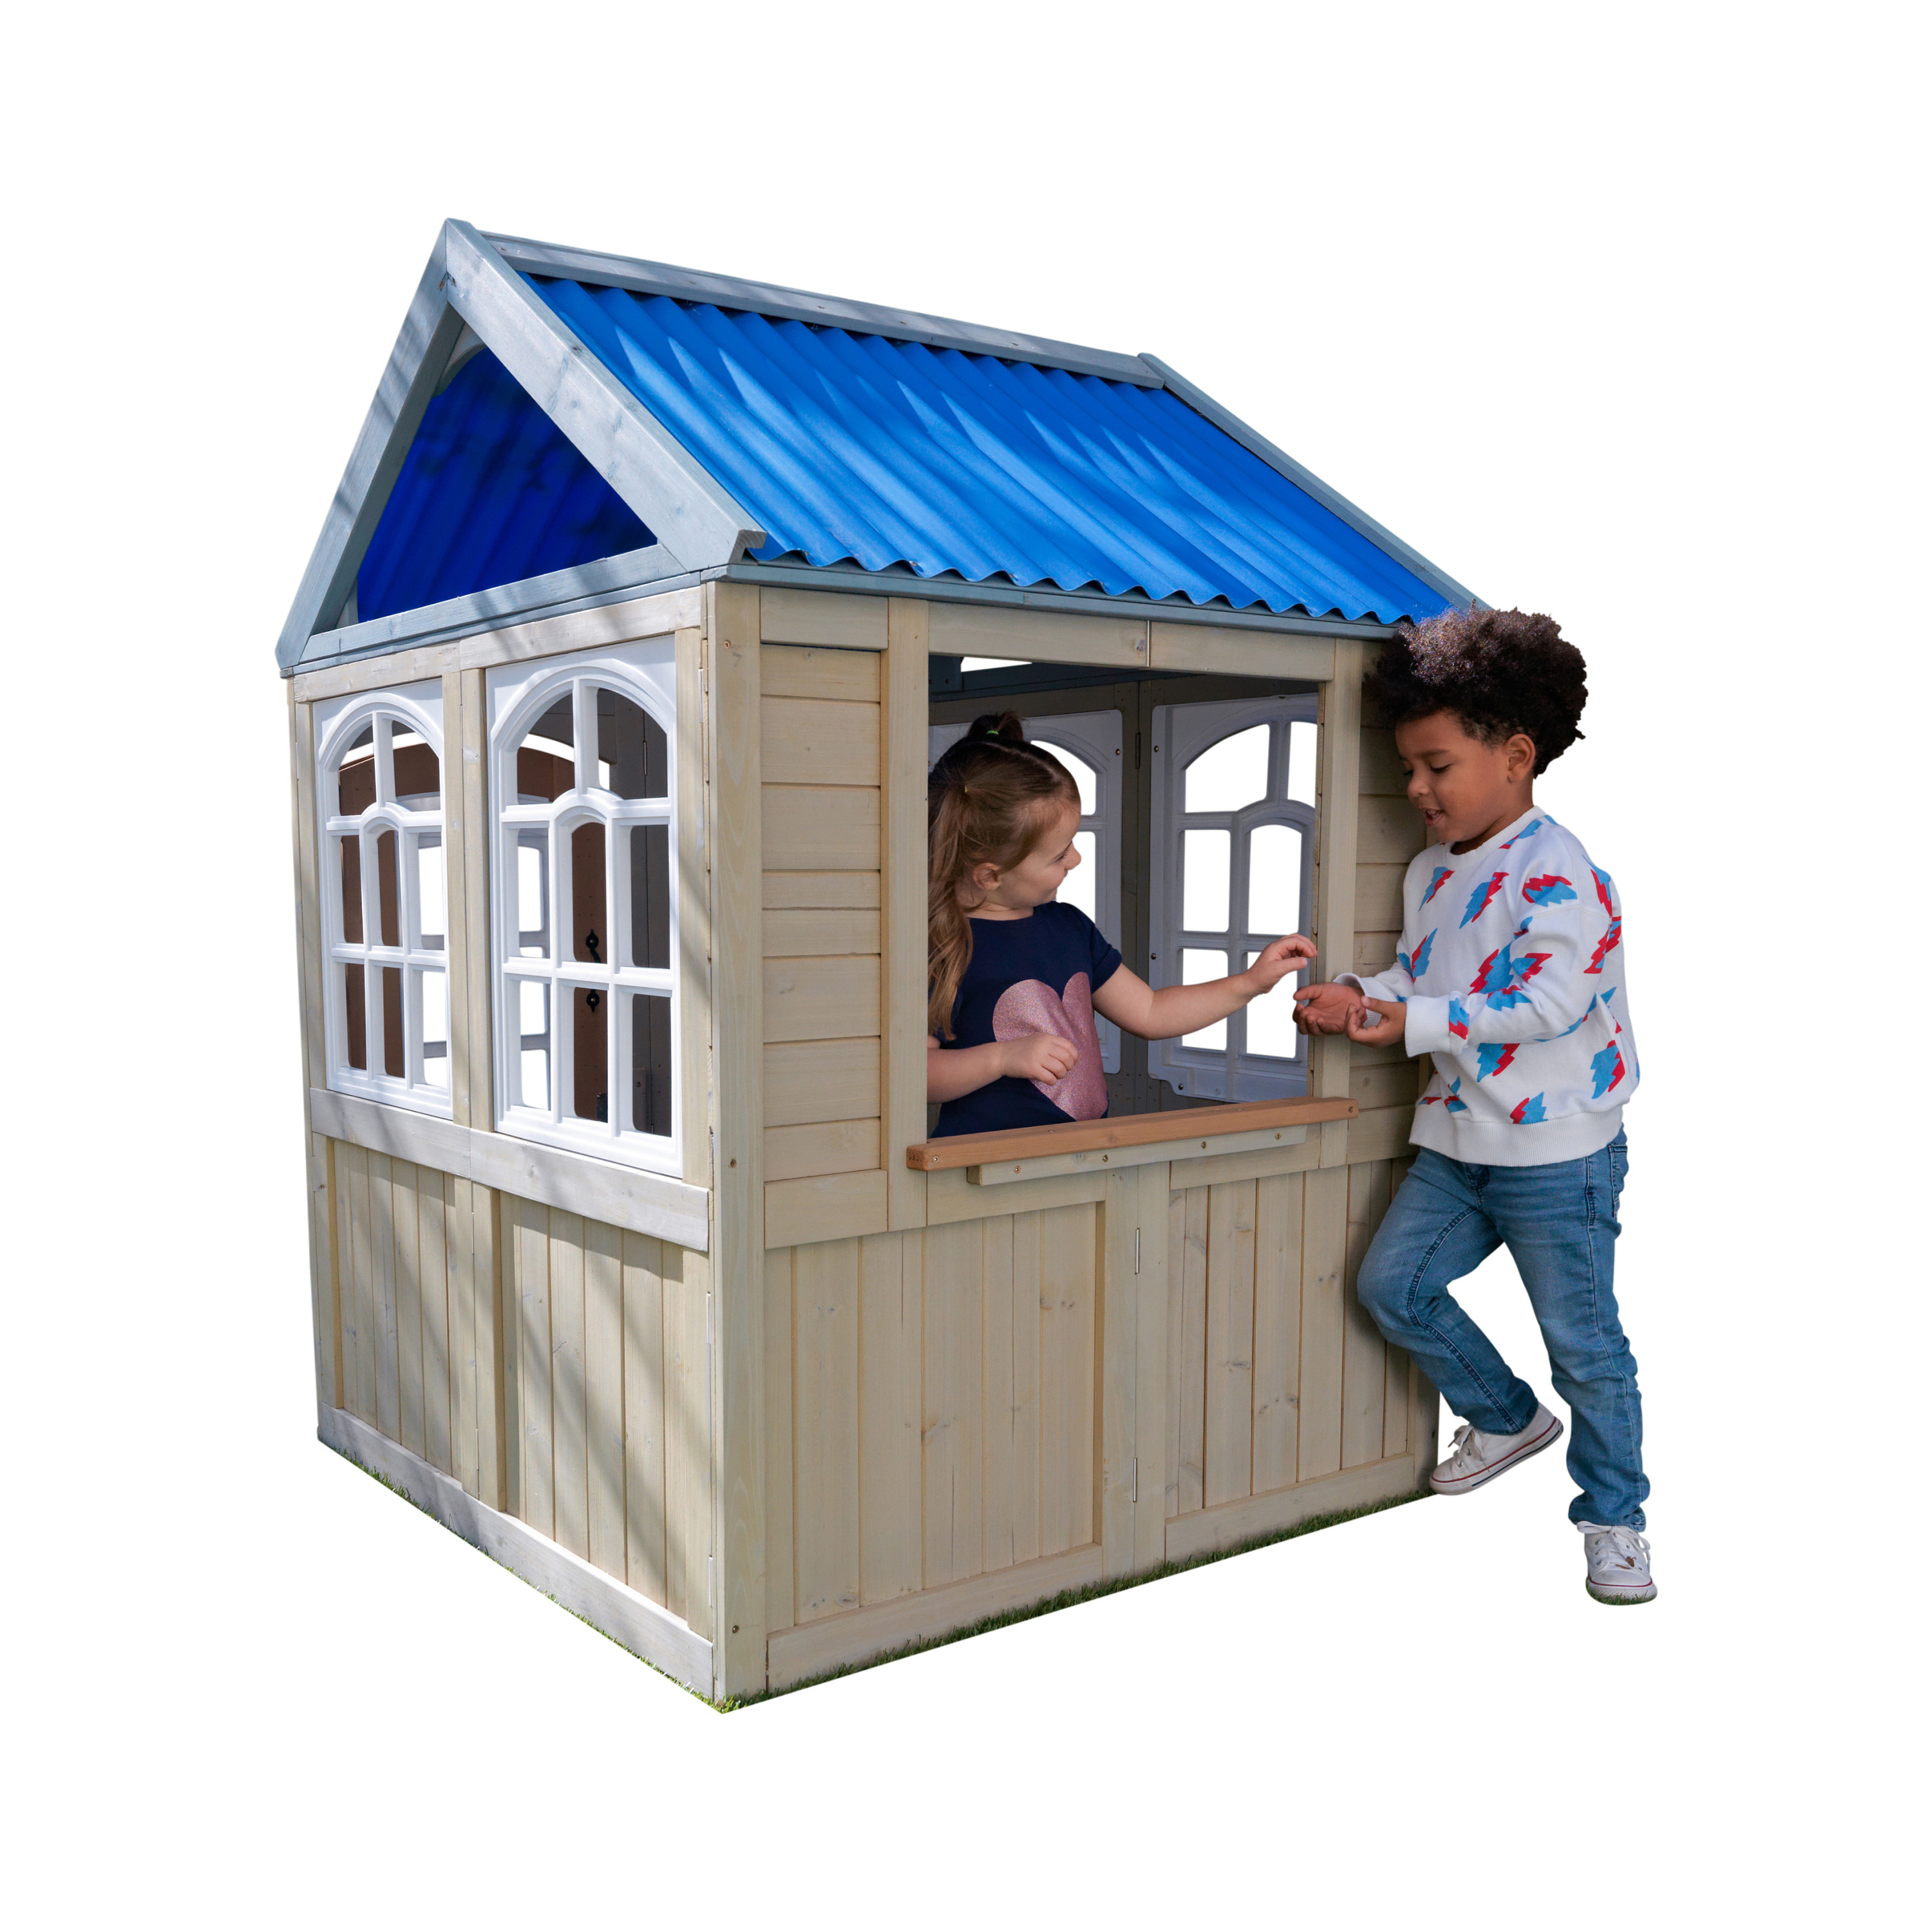 Details about   Kids Pretend Playhouse Working Doors Window Shutters 2-8 Years Old Plastic Pink 